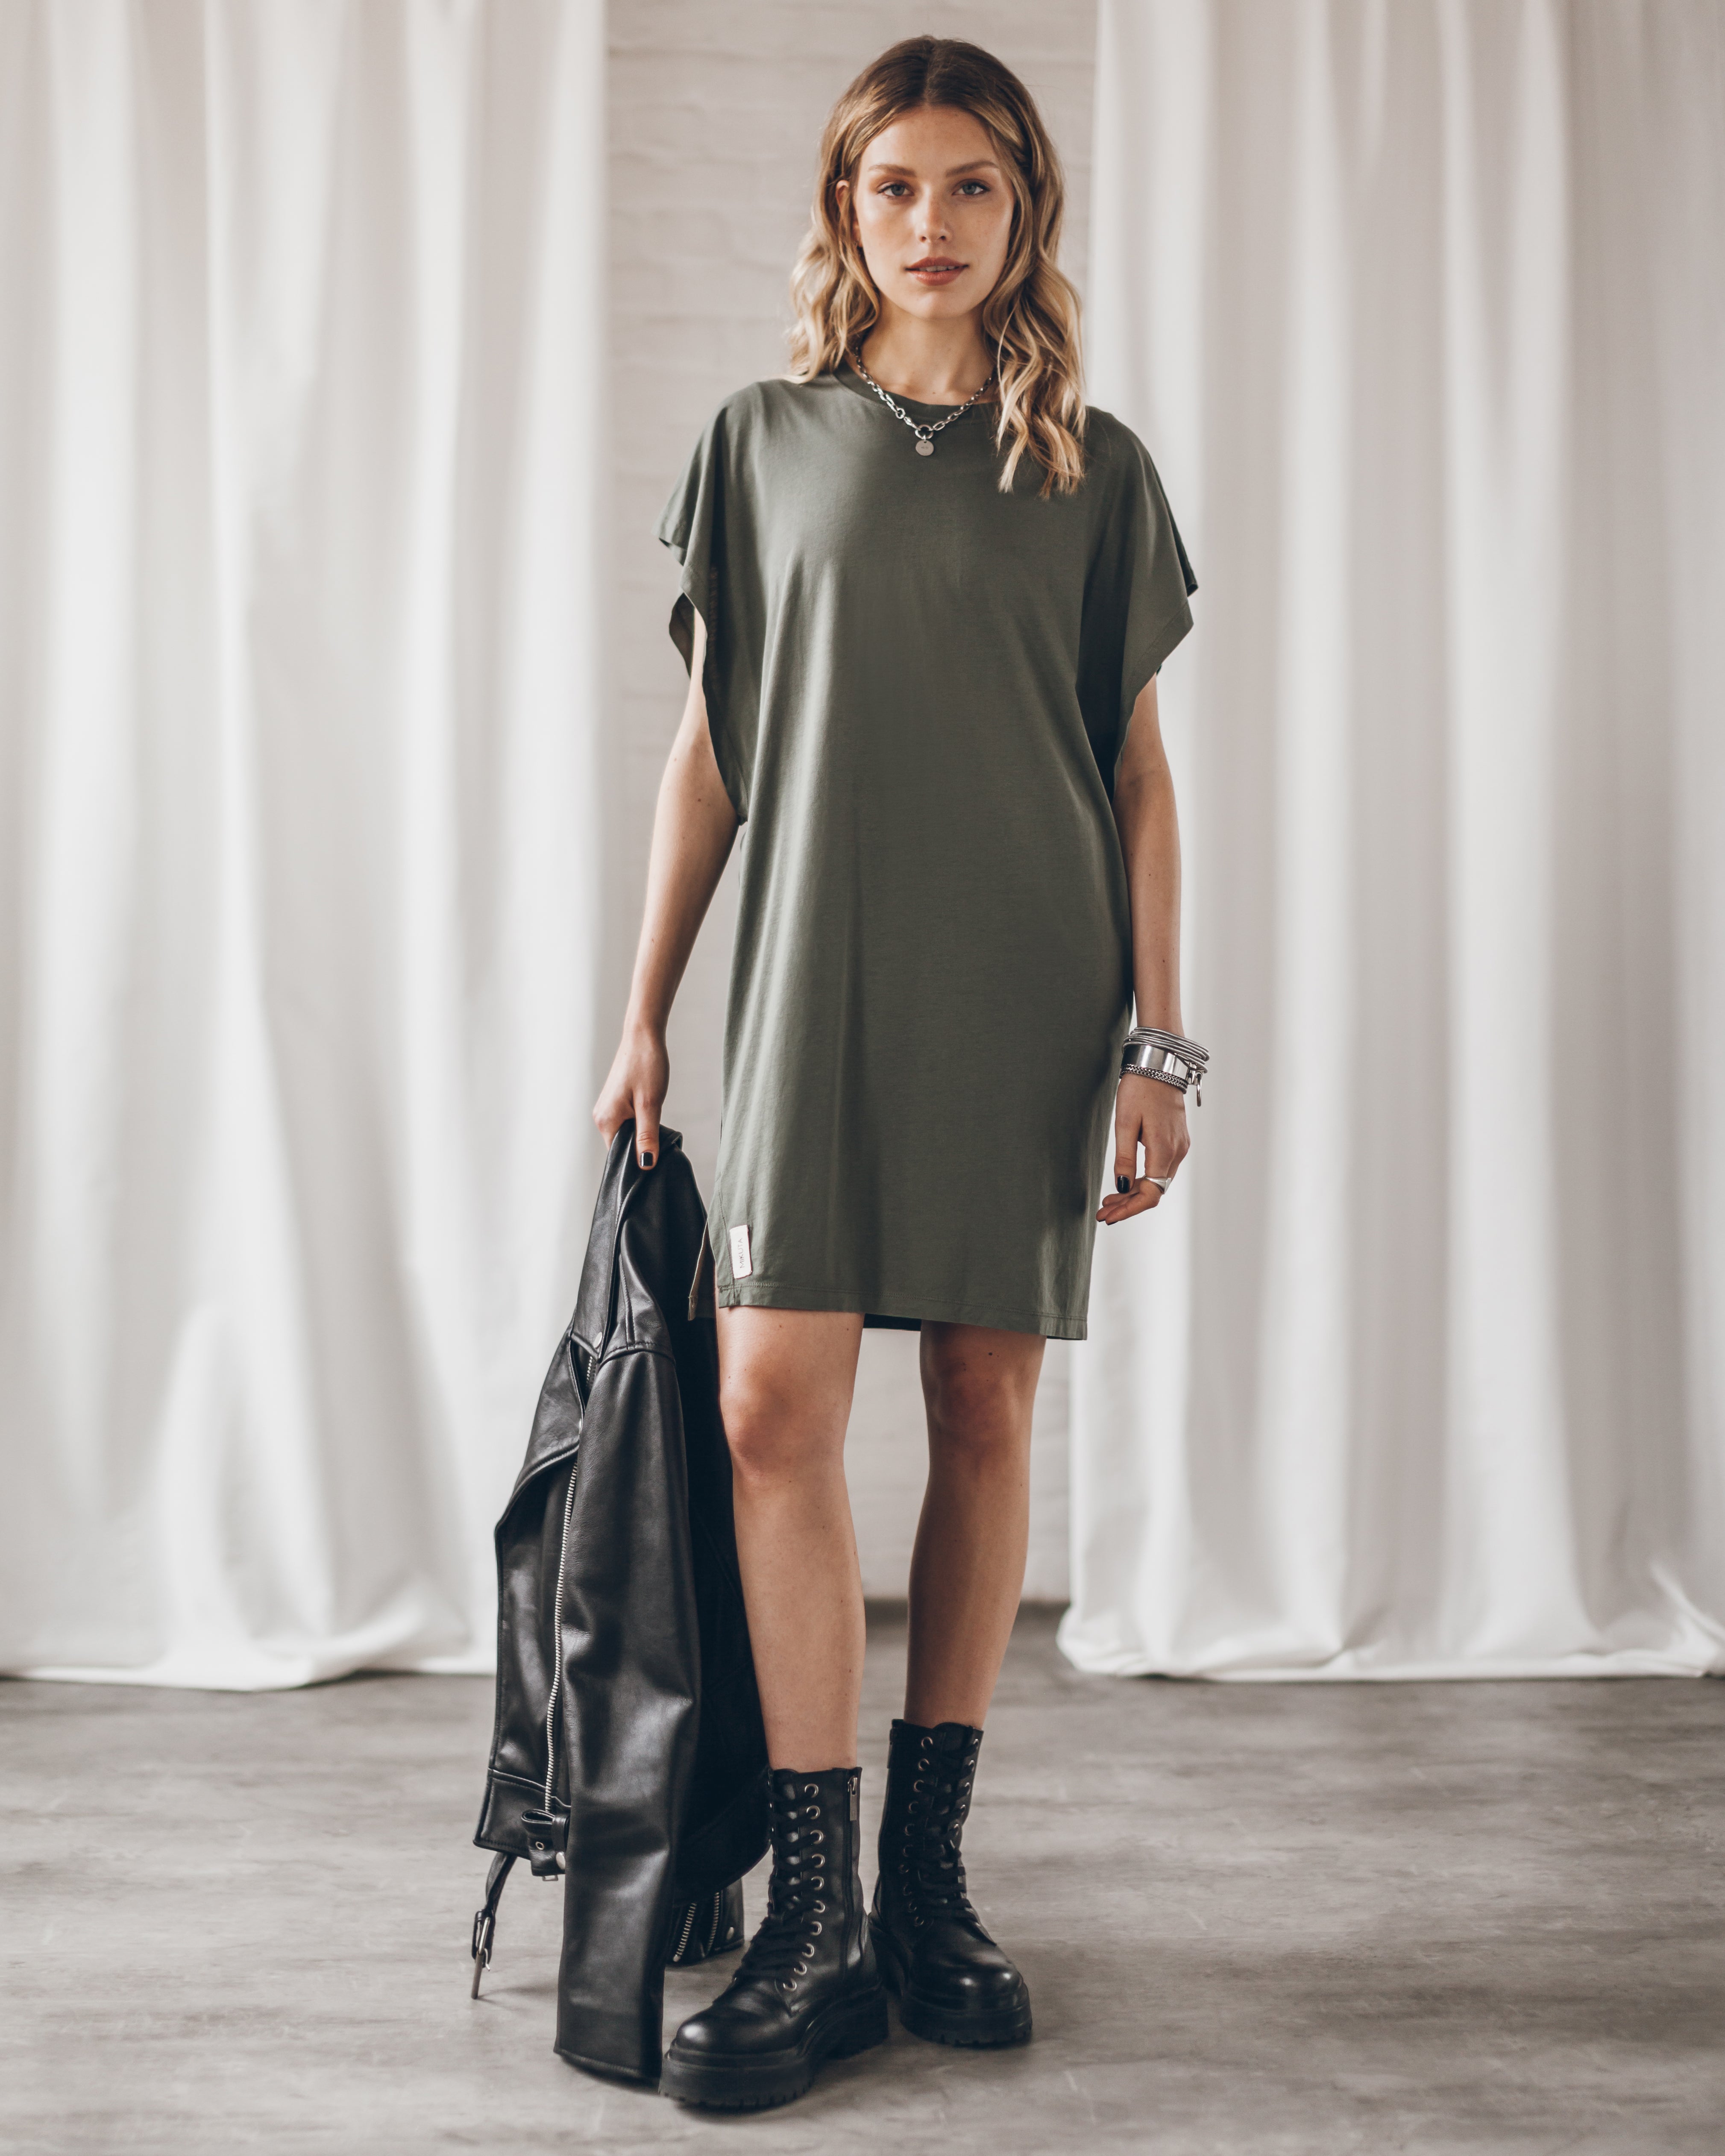 The Olive Short Batwing Dress